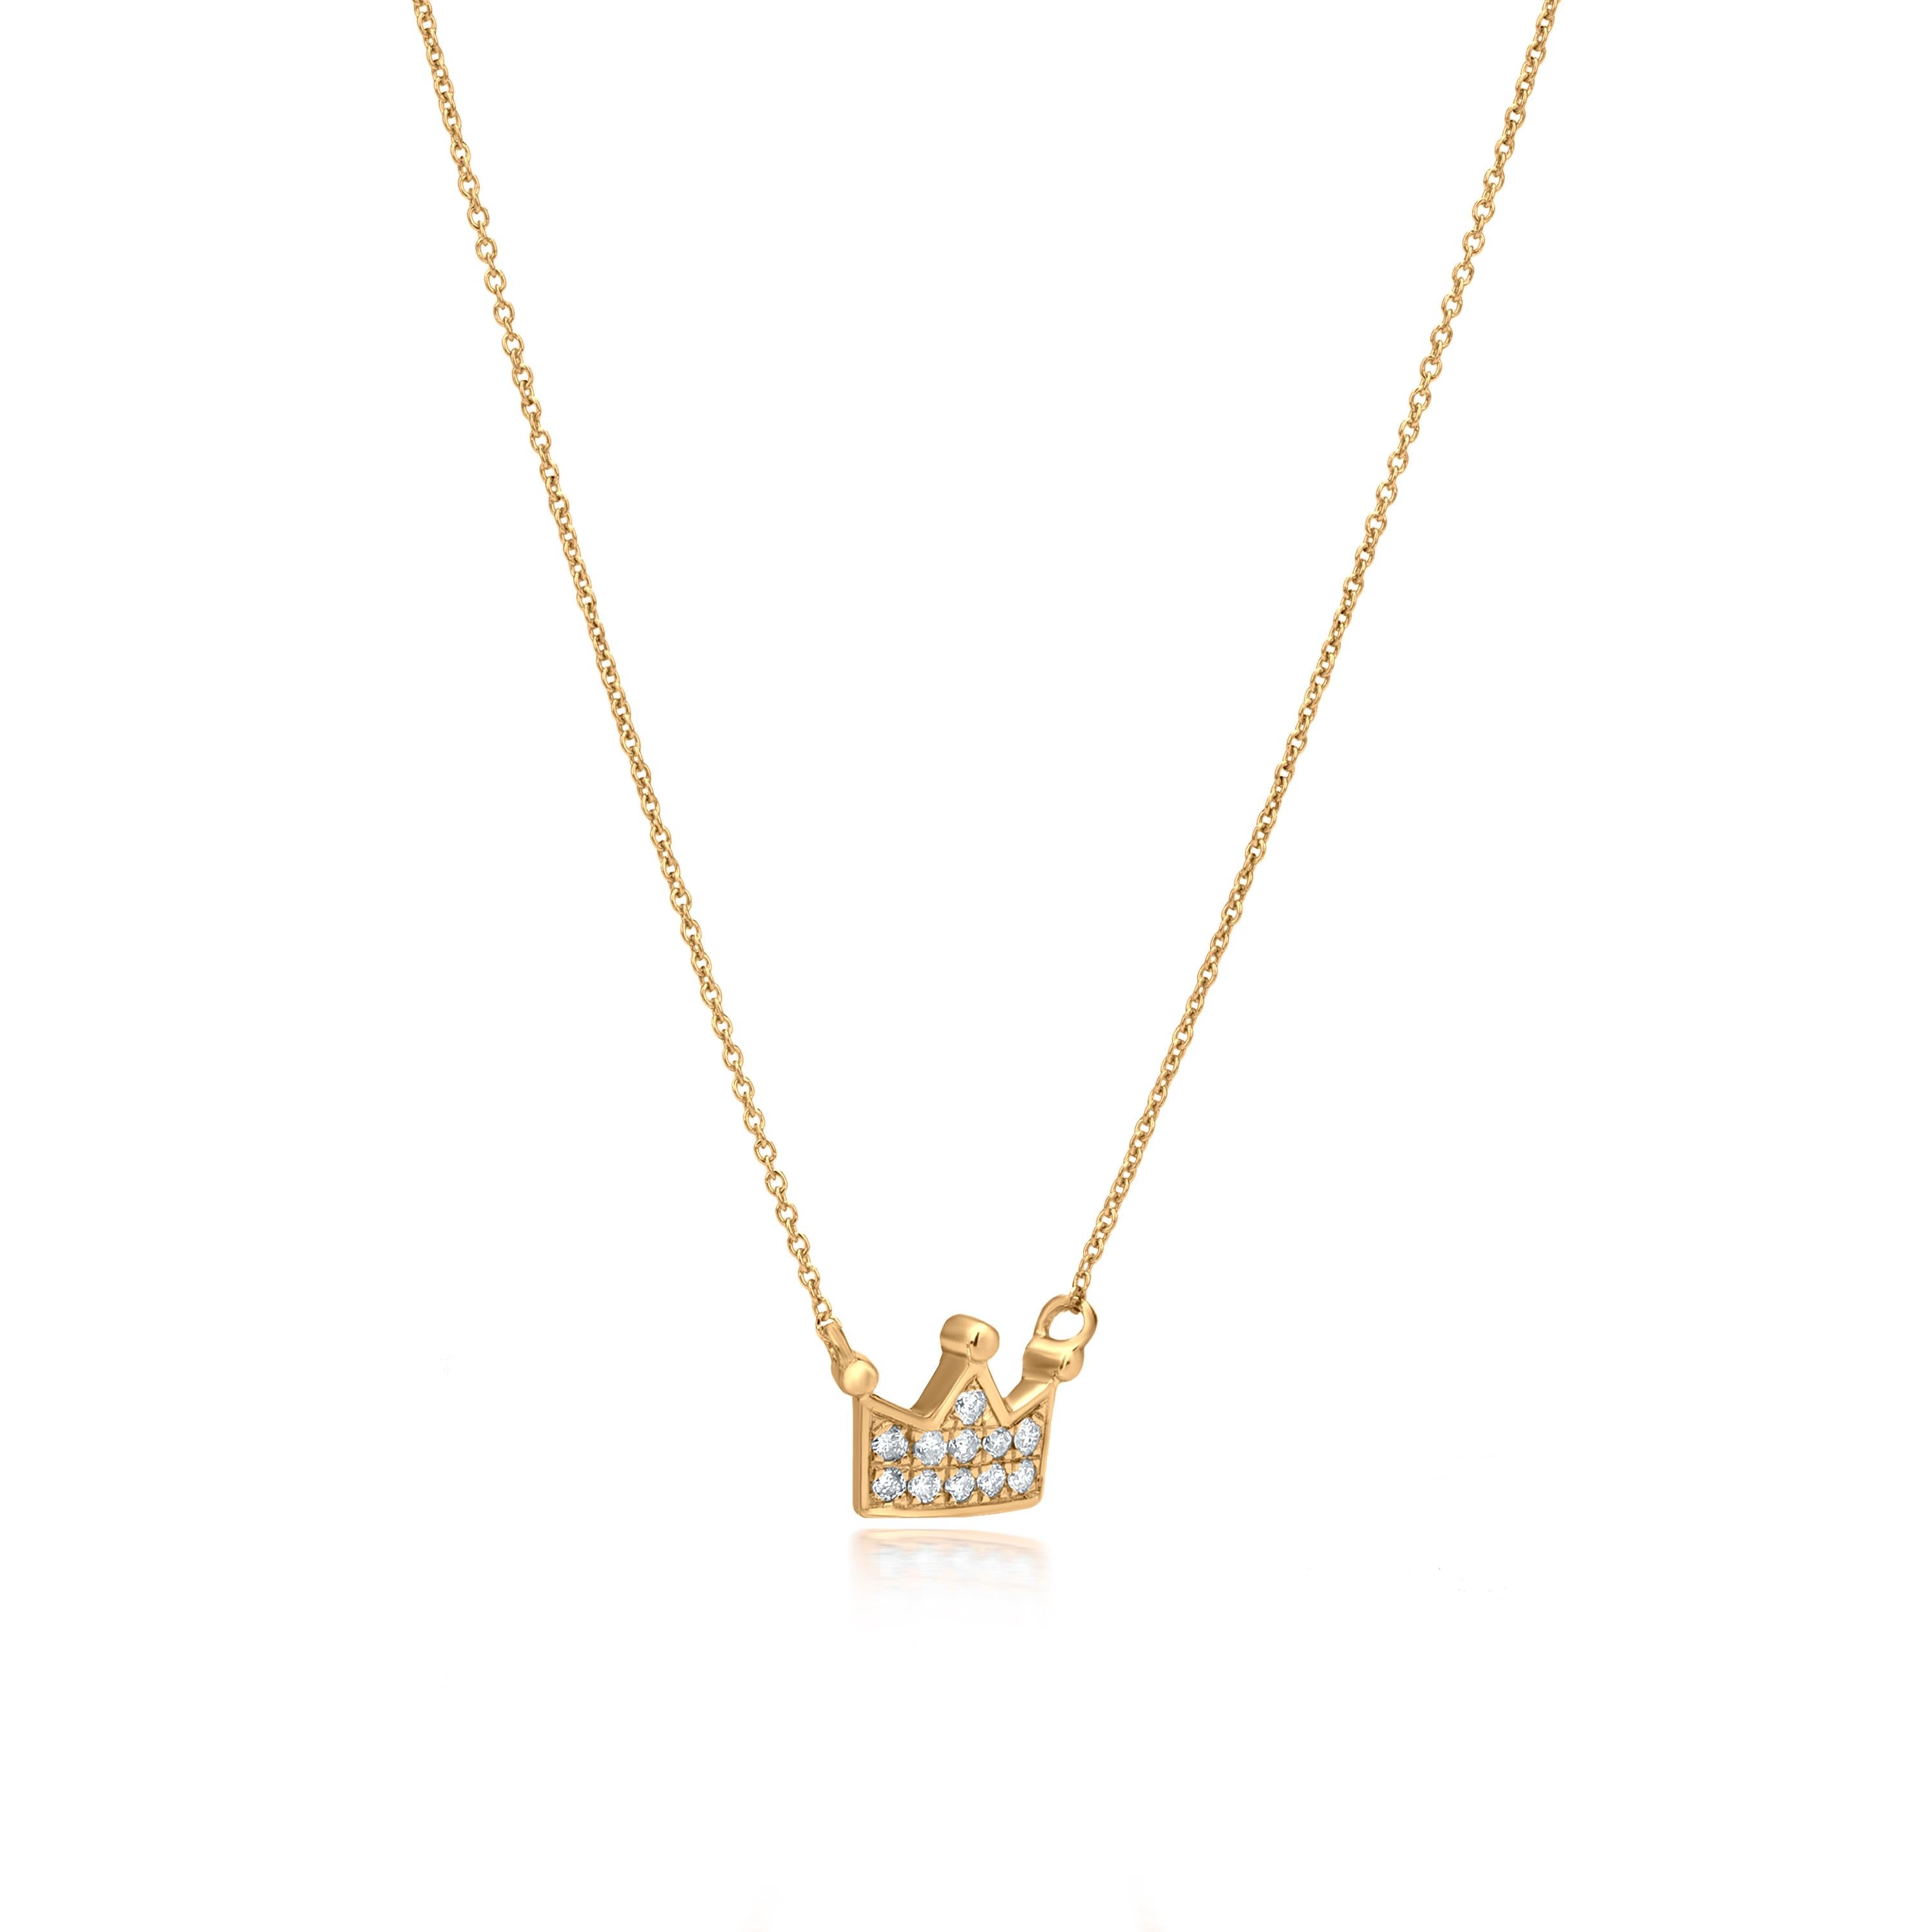 Round Cut Luxle Crown Diamond Pendant Necklace in 18K Yellow Gold